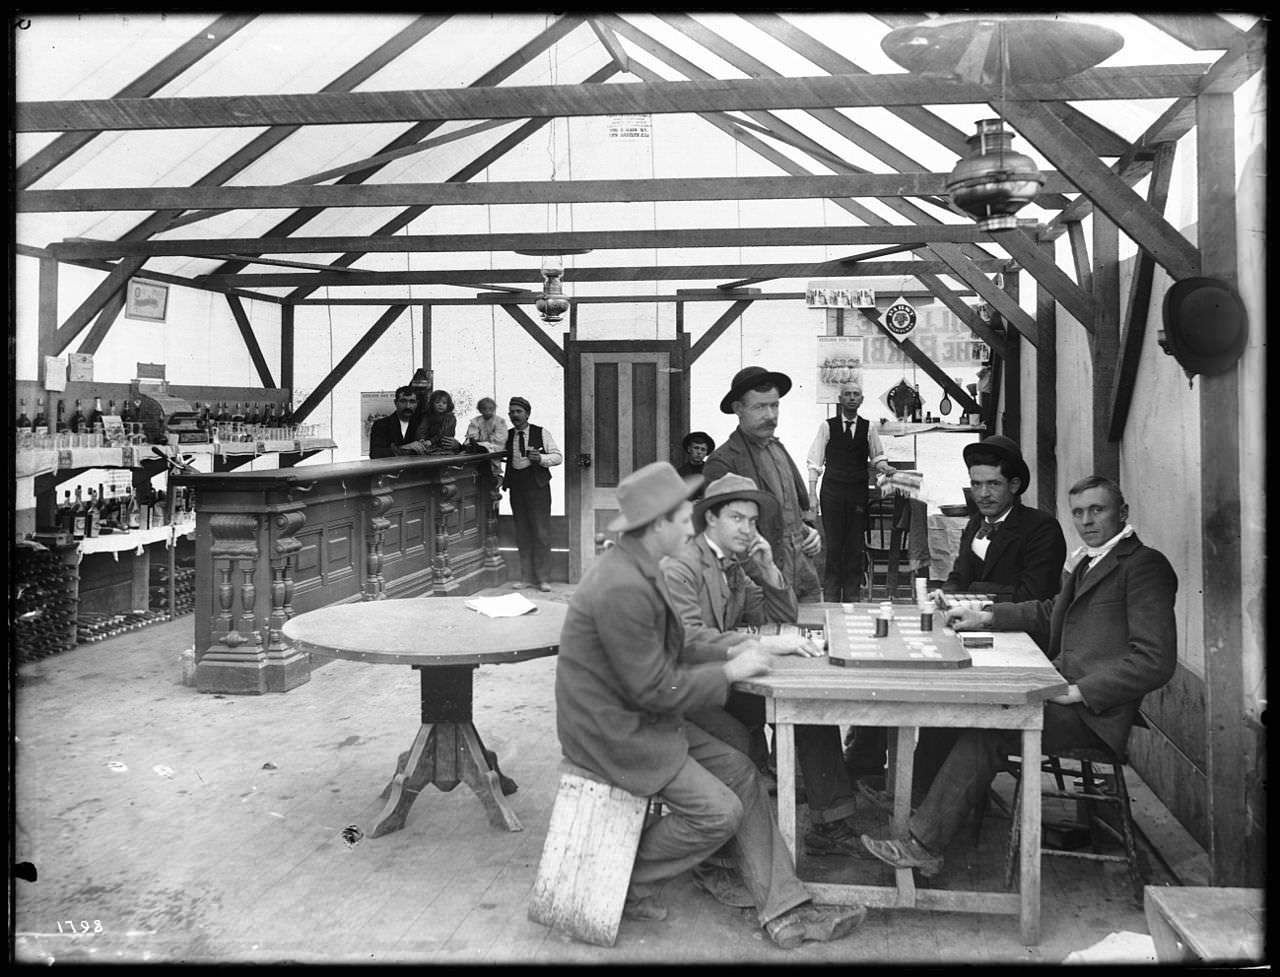 A saloon in a tent in a mining town in California, US in 1900.